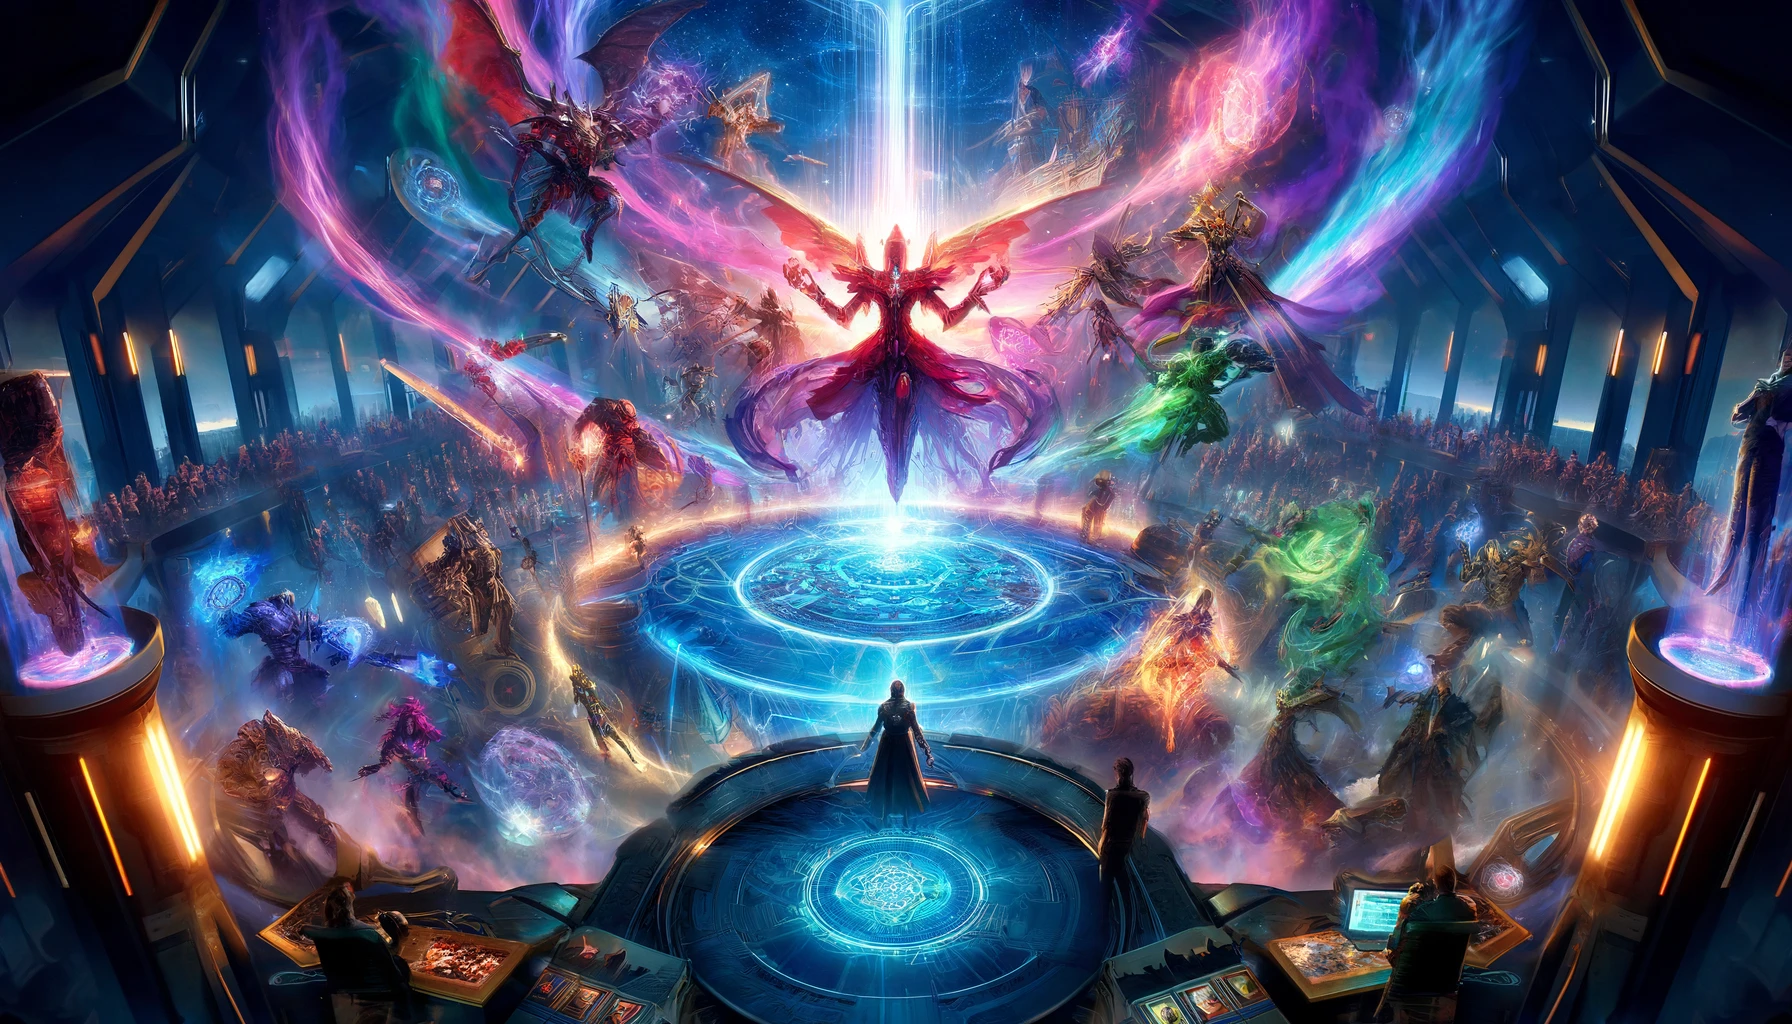 A wide-format image of a futuristic game arena, showing a diverse group of characters engaged in the final moment of a card game, with vibrant energy and color highlighting the intense, strategic actions and the thrill of the decisive moment.